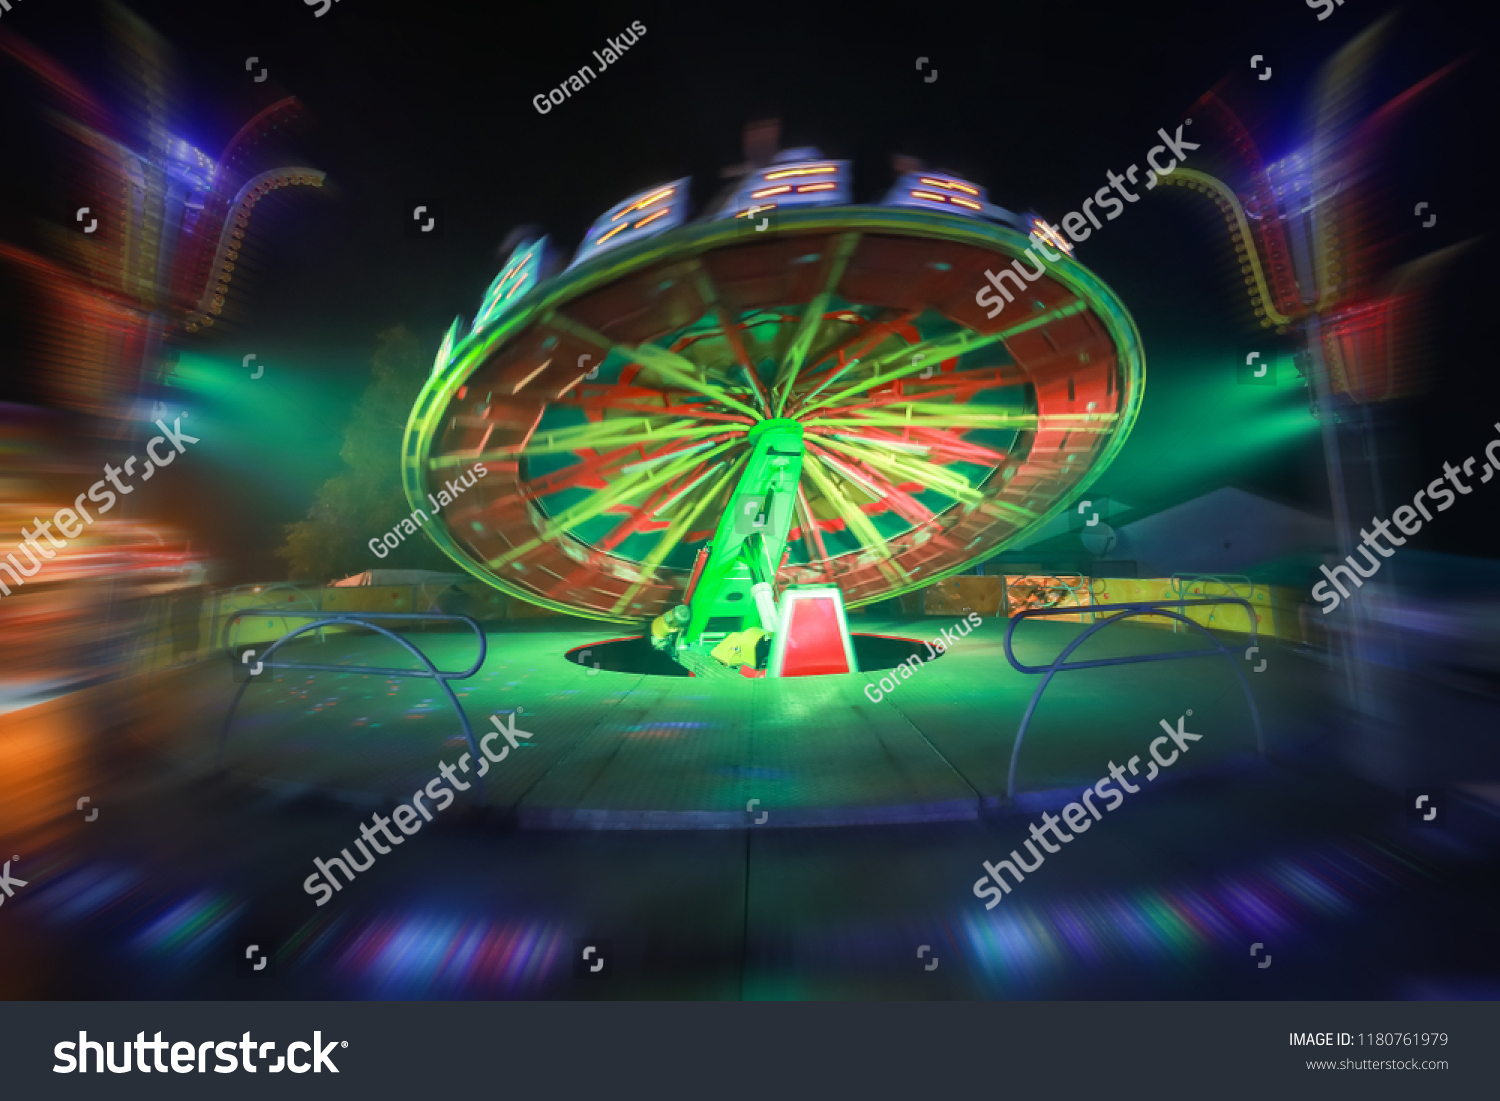 An illuminated rotating circular device in an amusement park with zoom in effect. #1180761979